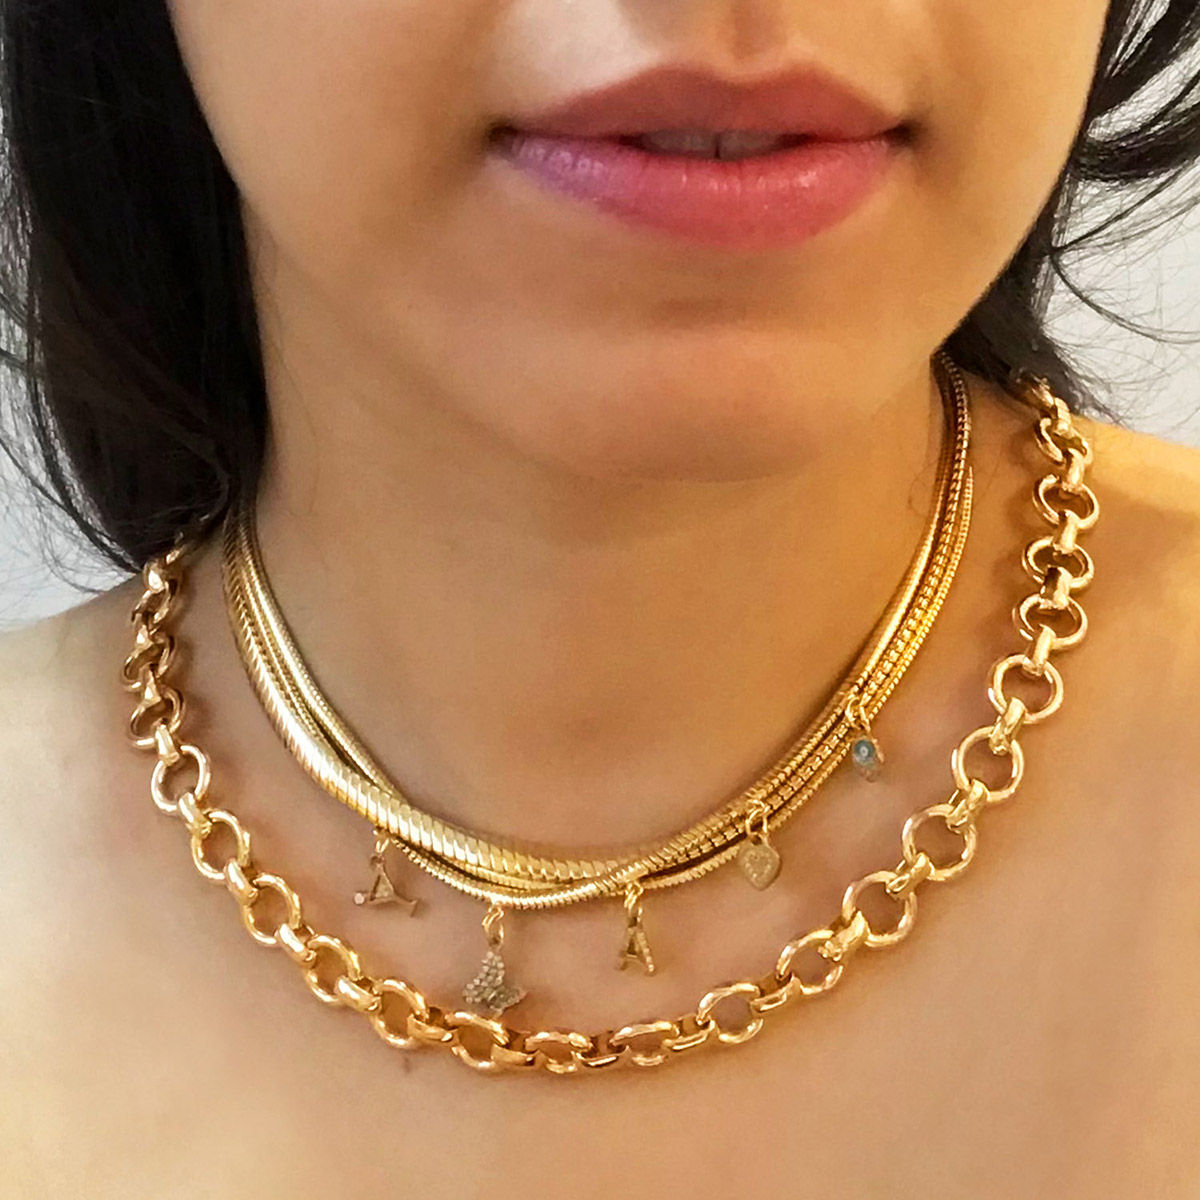 Pipa Bella Gold-Plated Snake

Chain